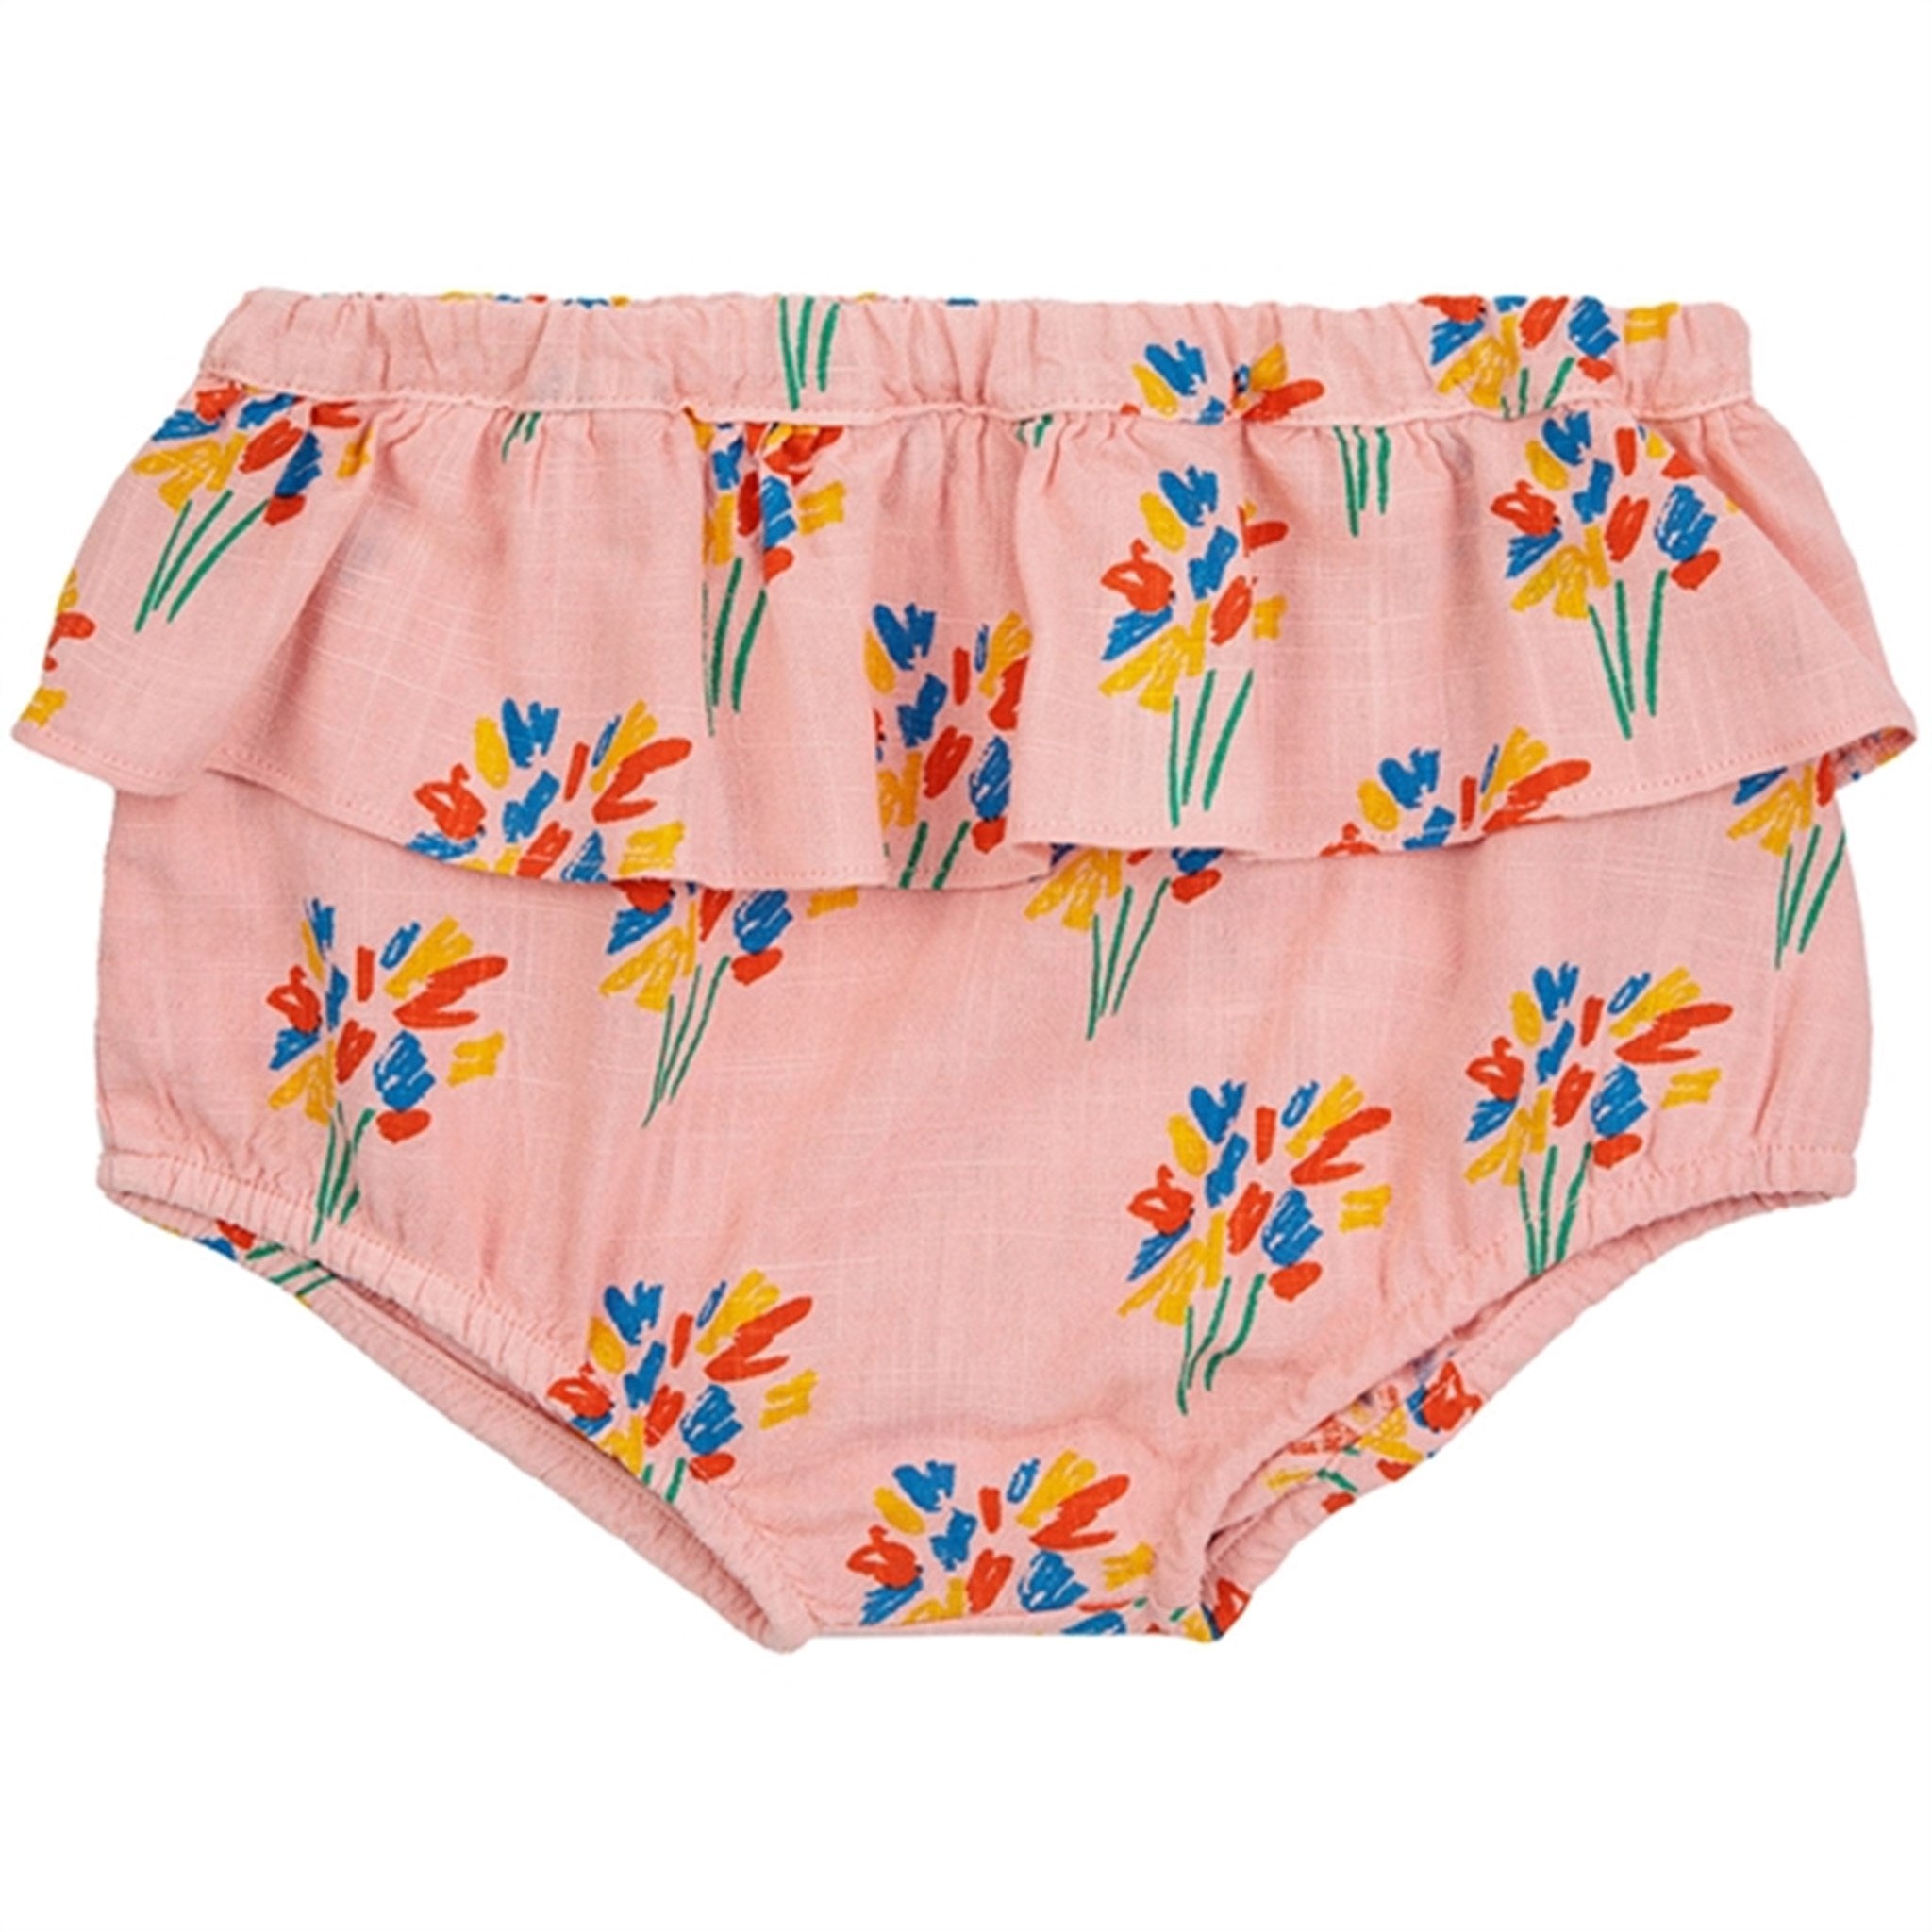 Bobo Choses Baby Fireworks All Over Ruffle Woven Bloomer Pink